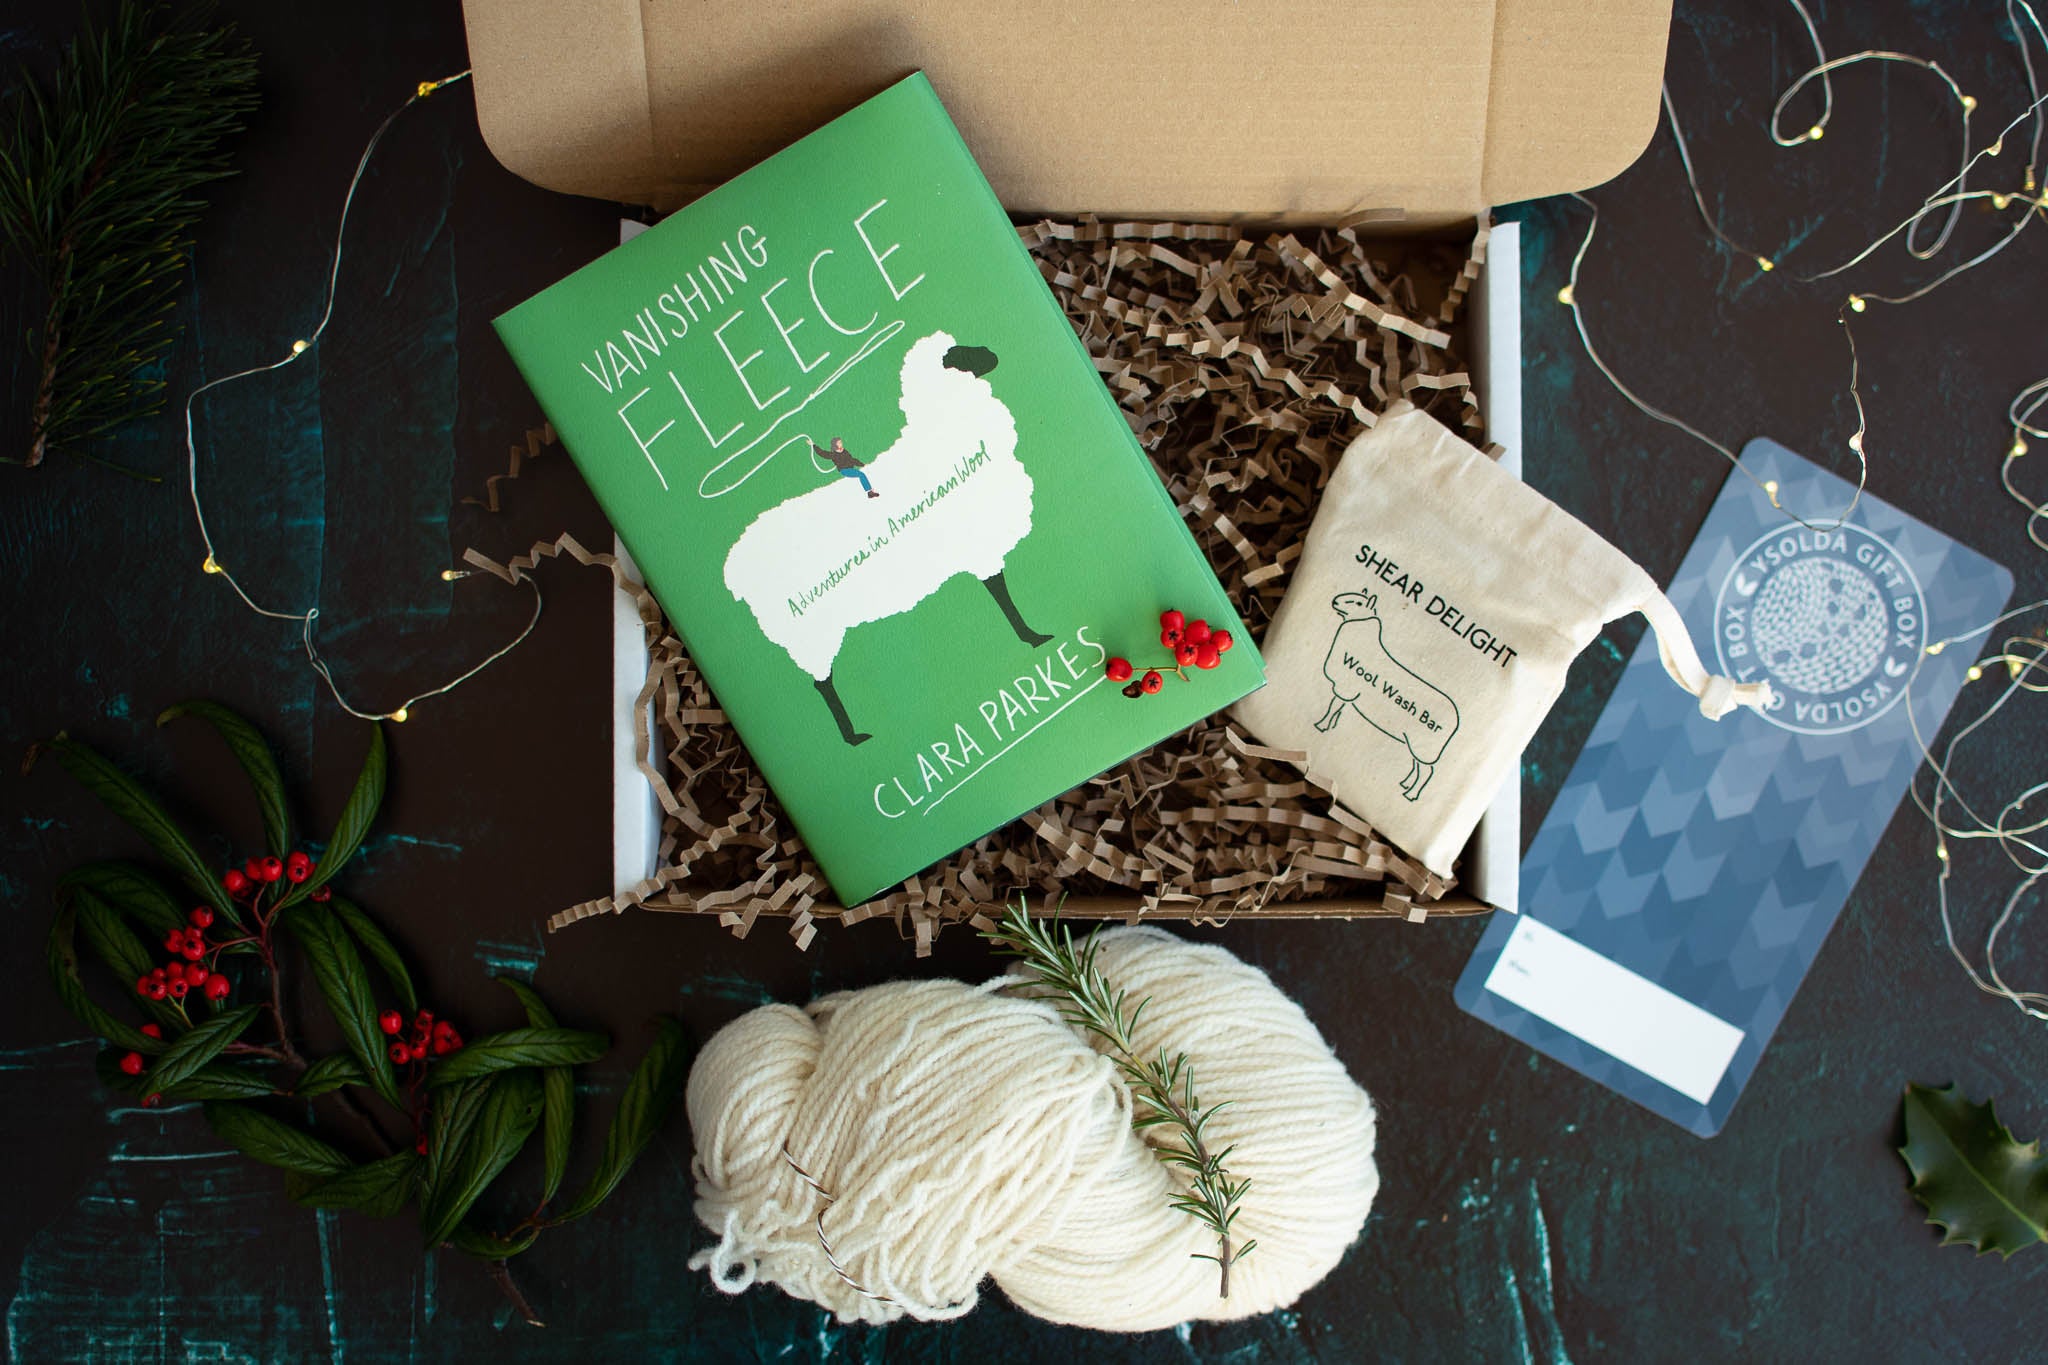 An image taken from above of an open box, containing a skein of white wool, a green book with a white sheep drawing on the cover, a bar of wool soap in a cotton drawstring bag.